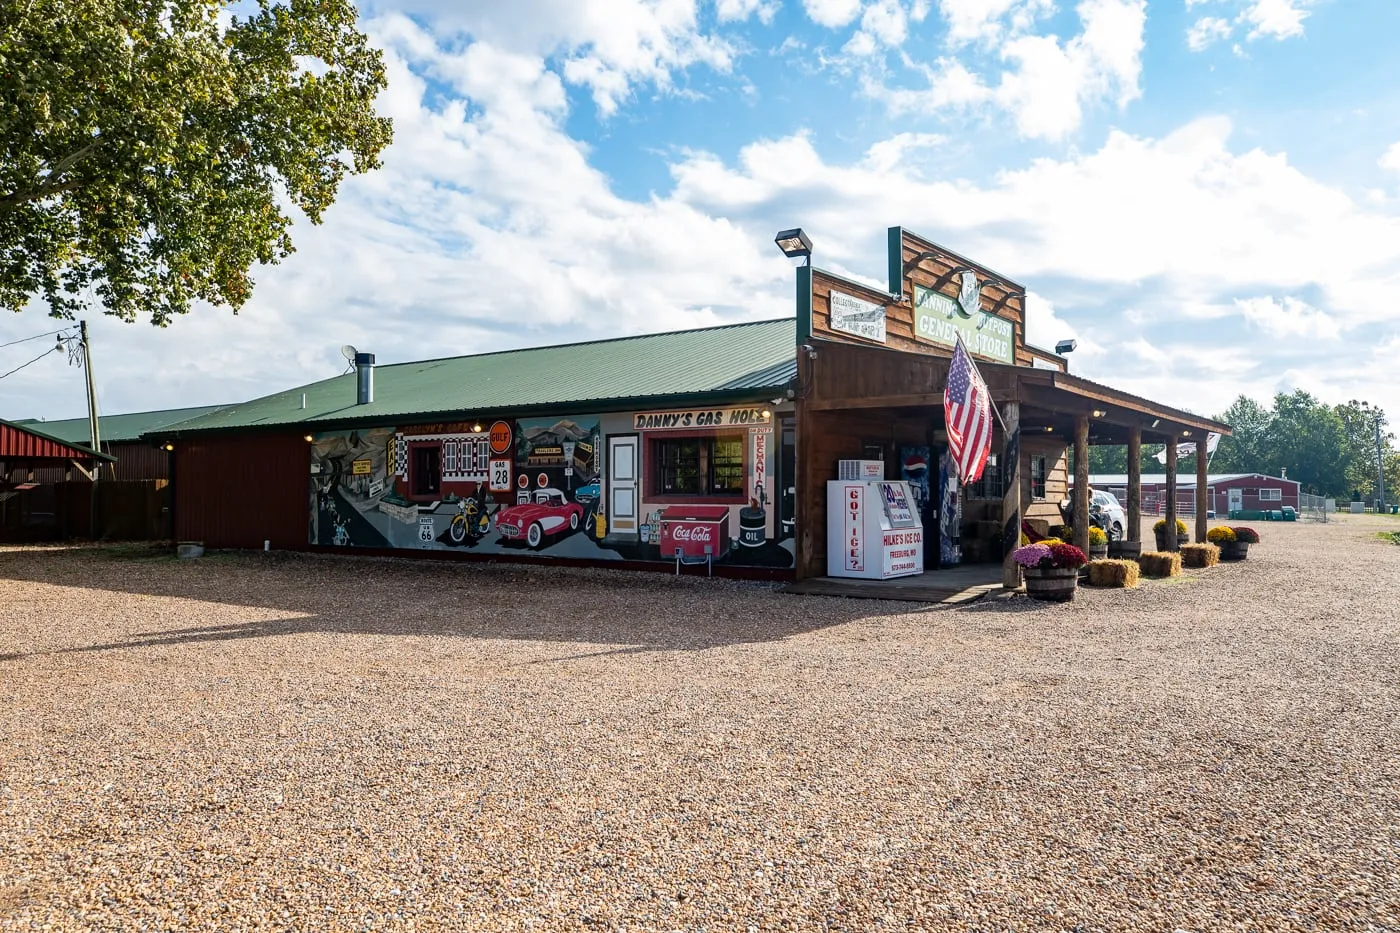 Fanning 66 Outpost & Feedstore on Route 66